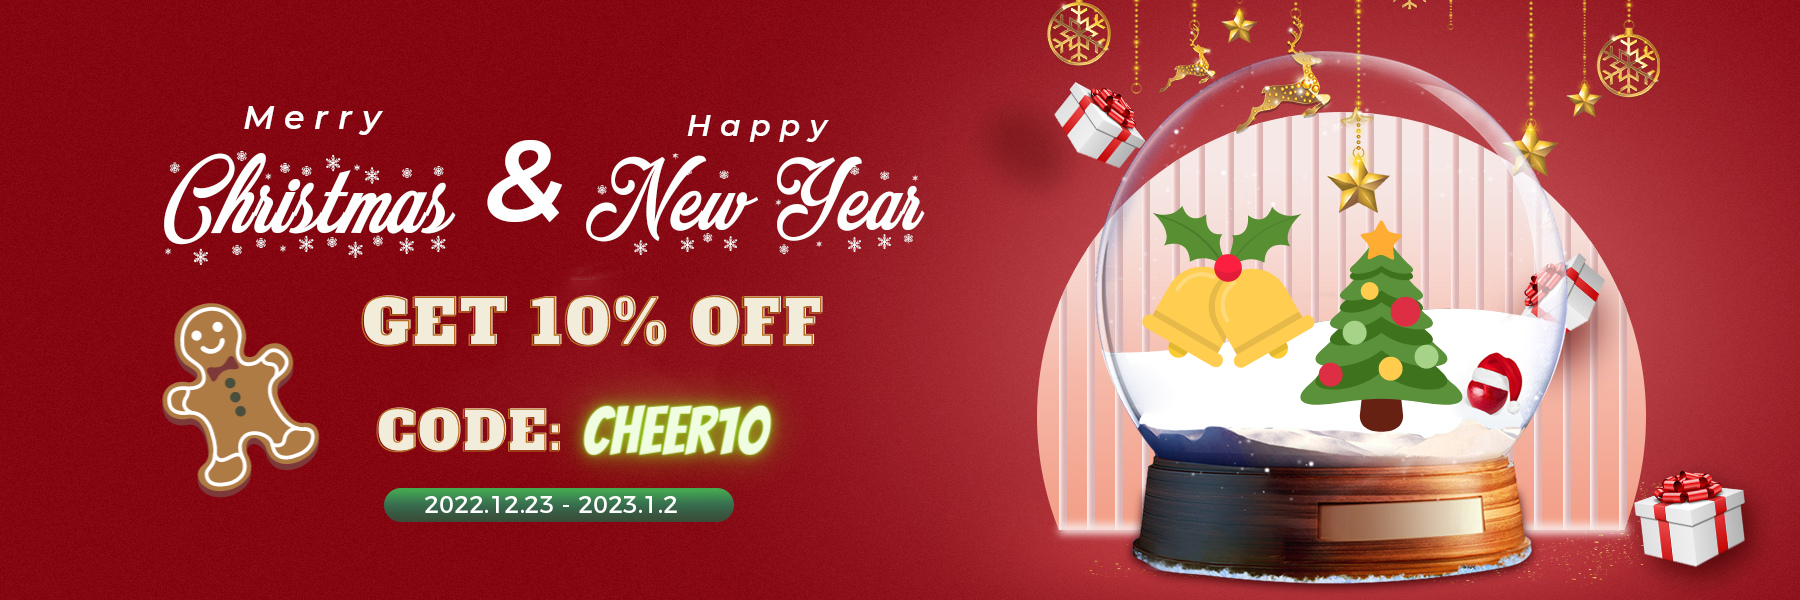 Merry Christmas & Happy New Year Sale